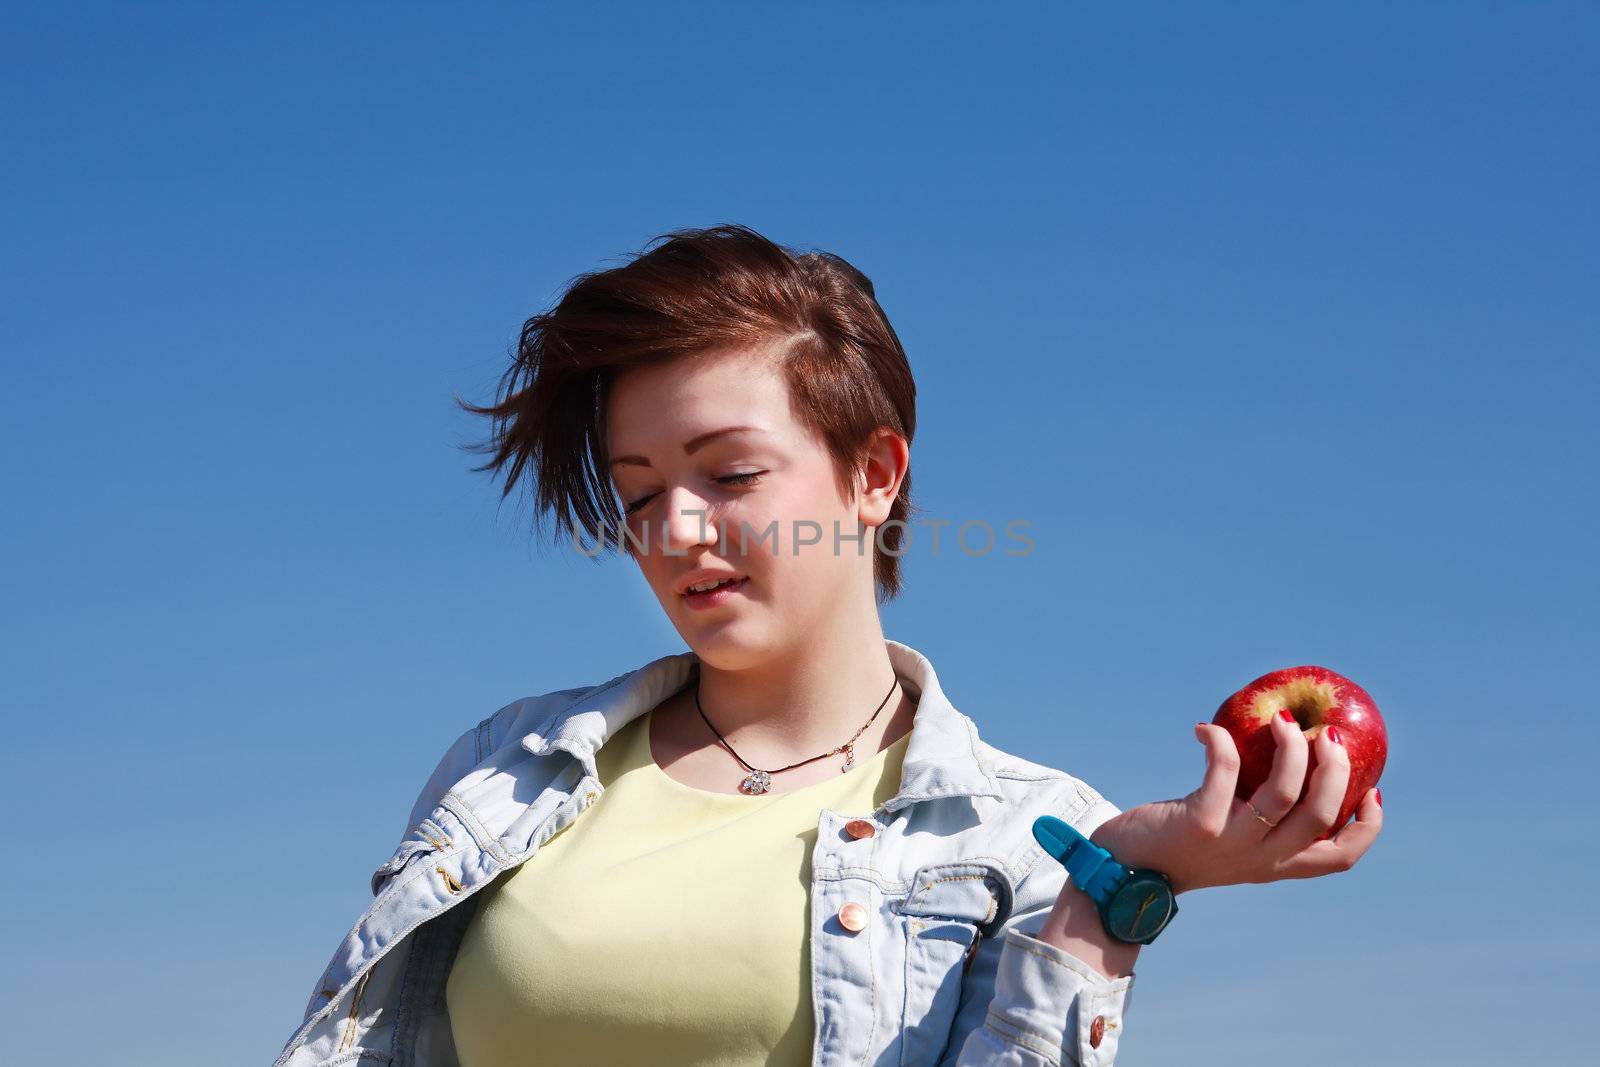 Beautiful young girl handing red apple against blue sky background